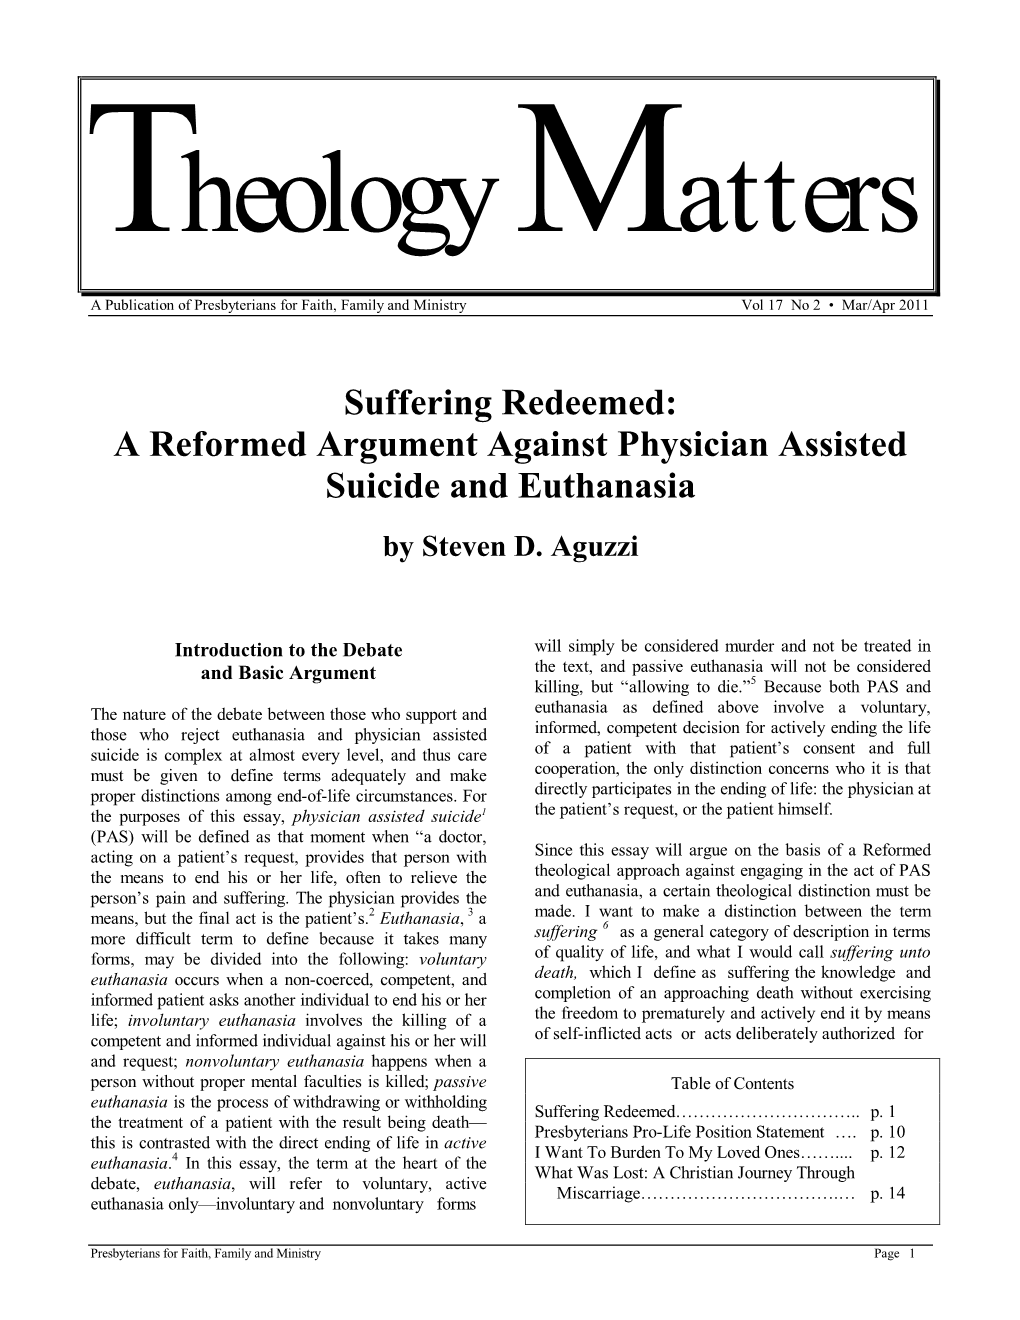 Suffering Redeemed: a Reformed Argument Against Physician Assisted Suicide and Euthanasia